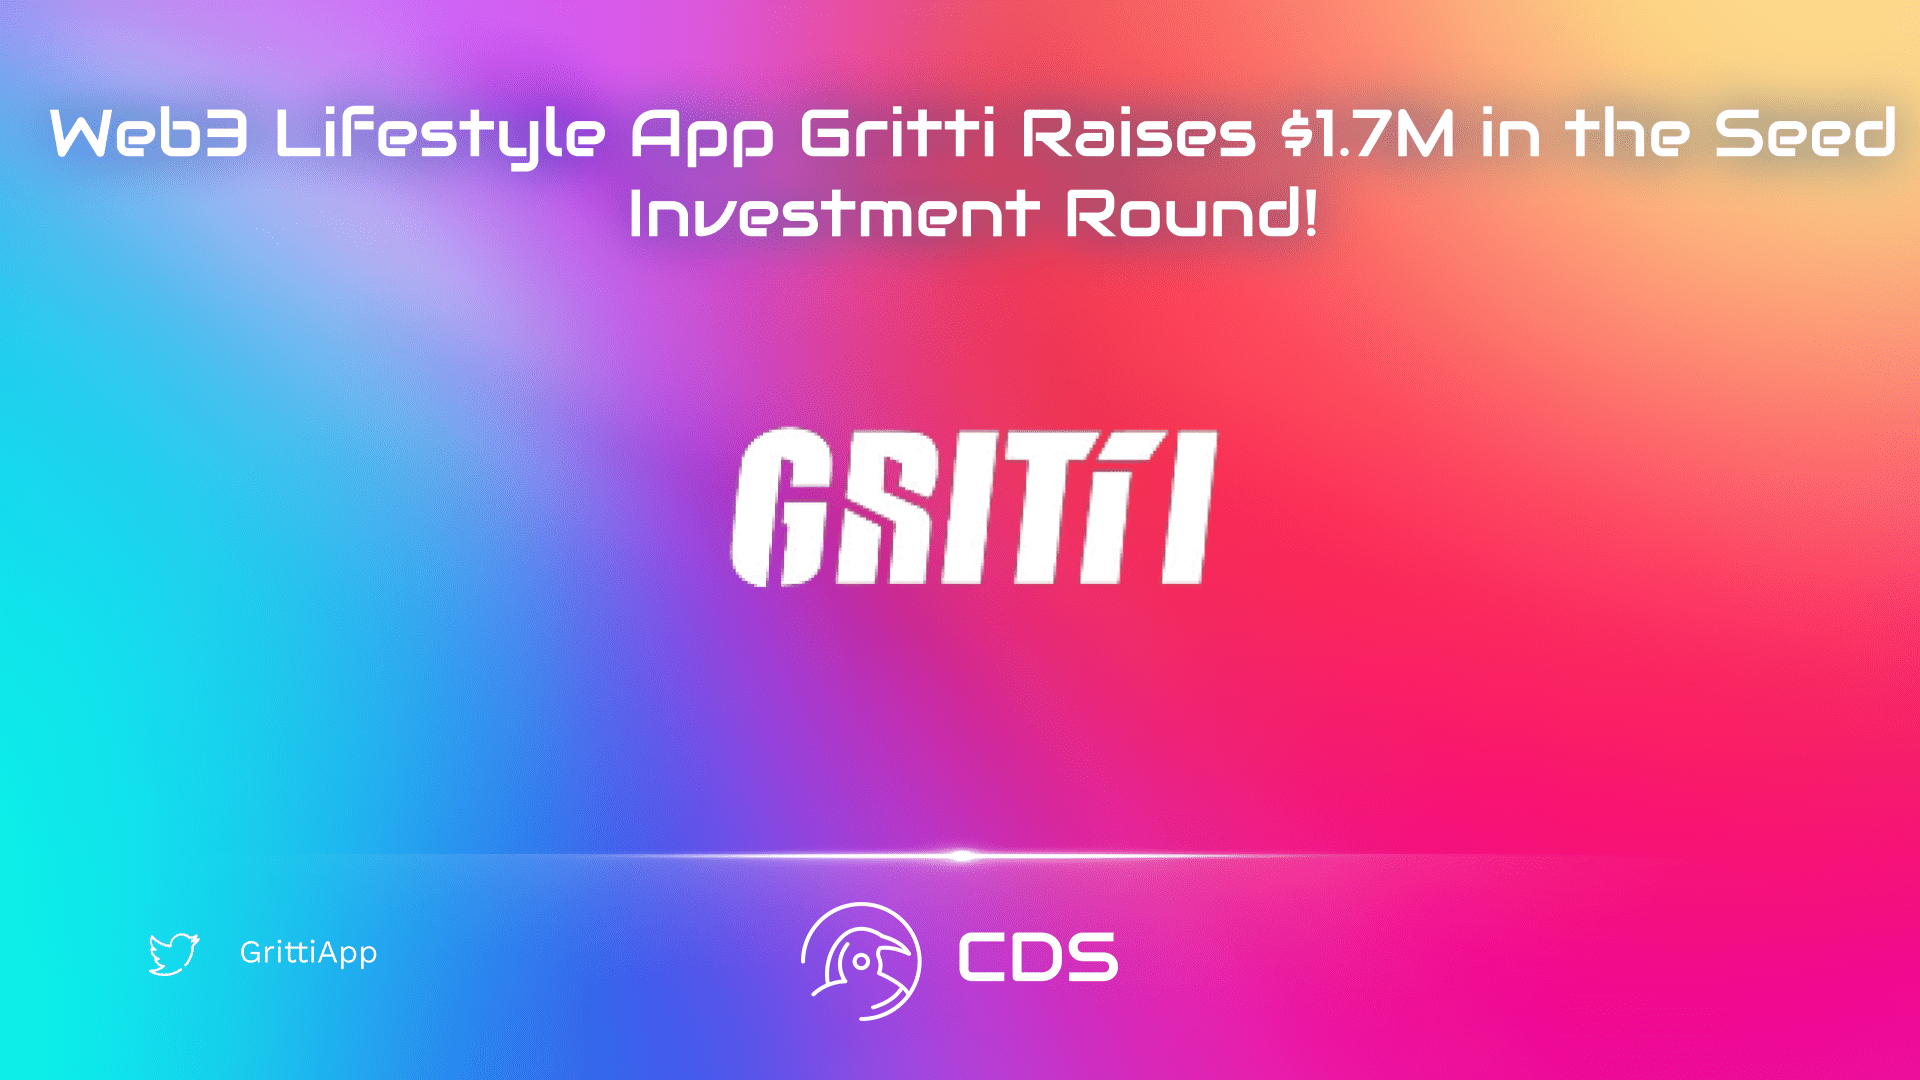 Web3 Lifestyle App Gritti Raises $1.7M in the Seed Investment Round